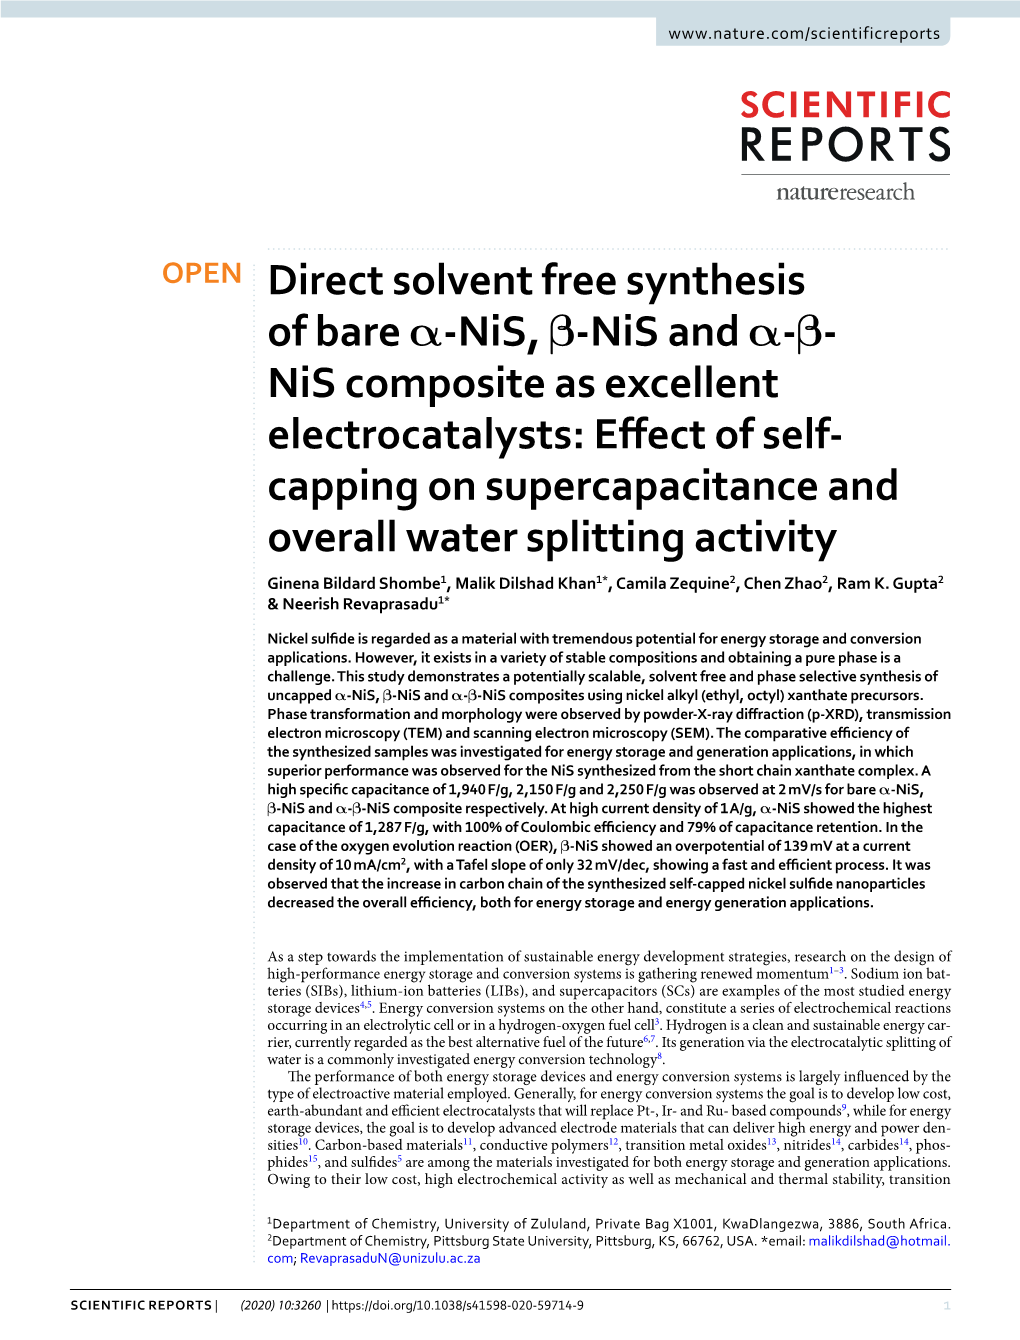 Direct Solvent Free Synthesis of Bare Α-Nis, Β-Nis and Α-Β-Nis Composite As Excellent Electrocatalysts: Effect of Self-Cappi